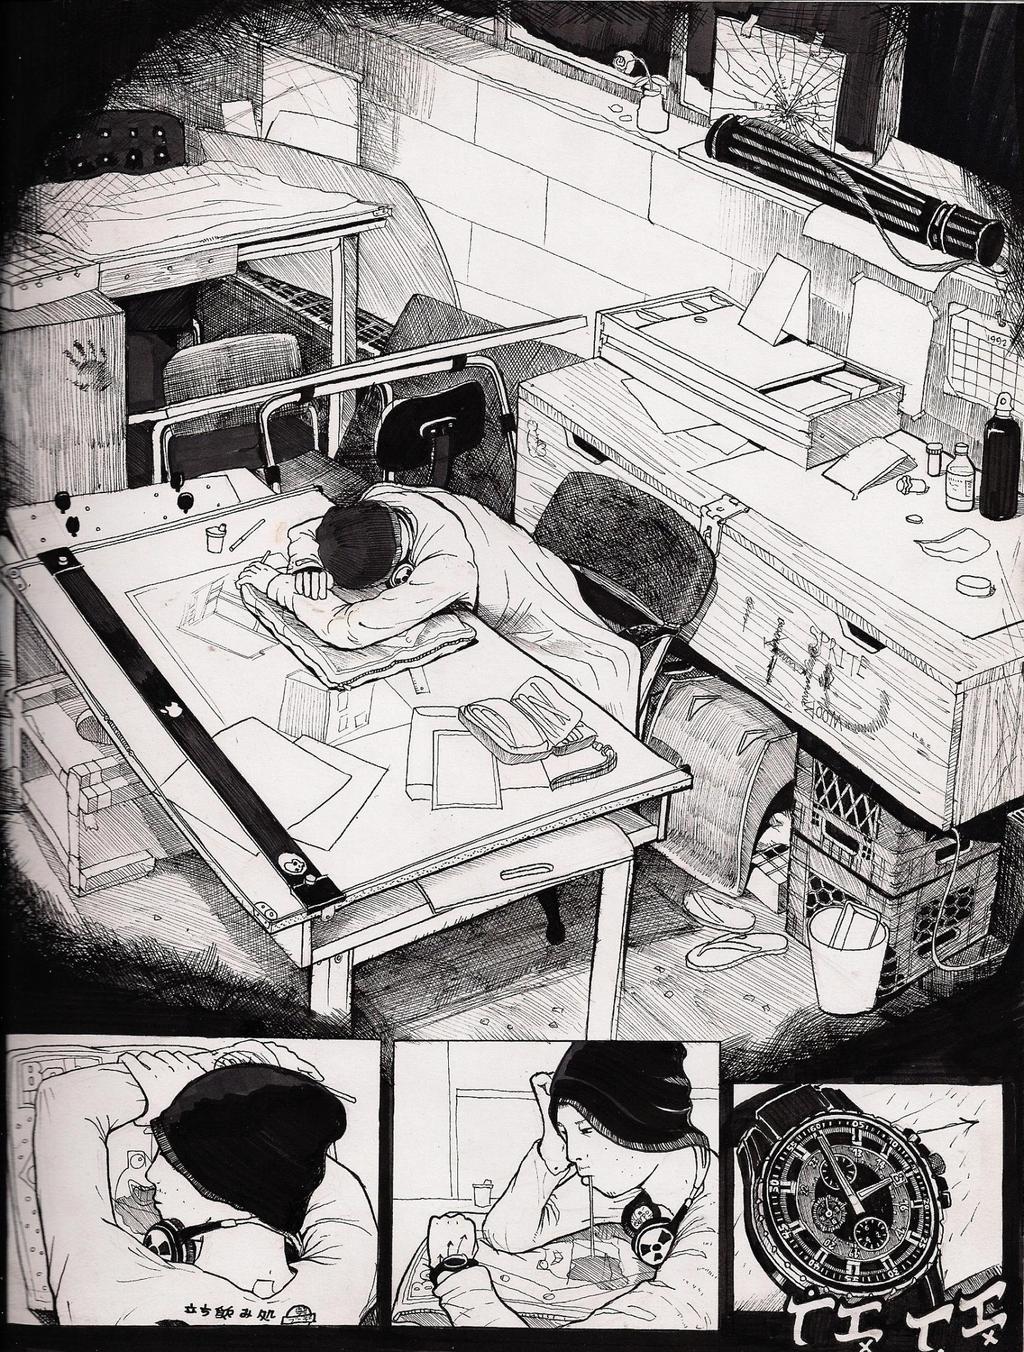 Graphic Novel A Day in a life of an Architecture Student I Finally Get to Draw with